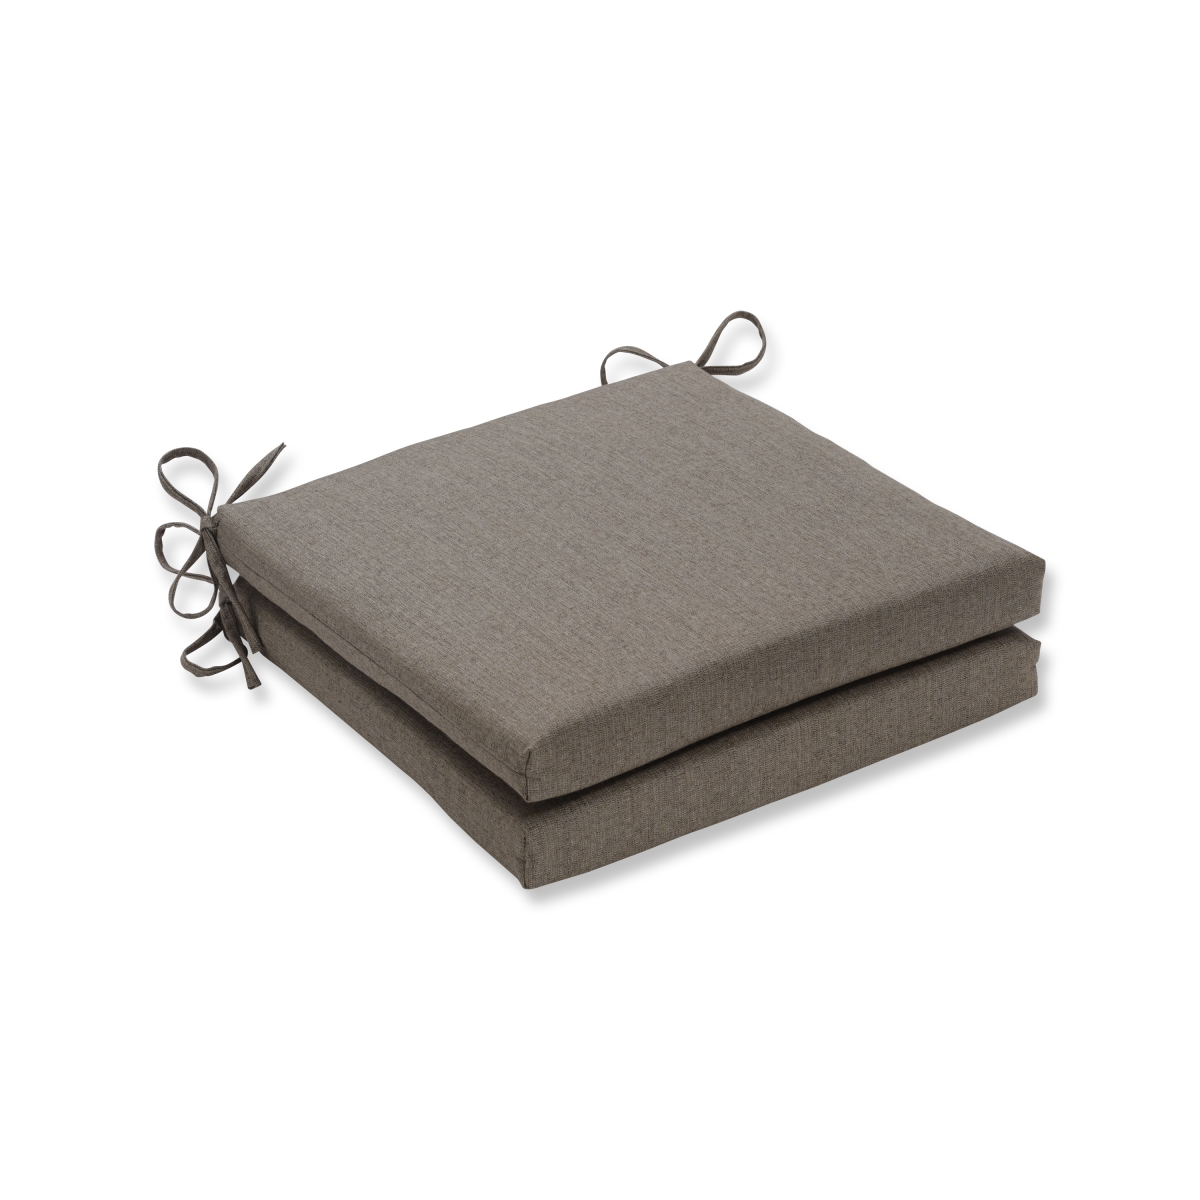 614632 20 X 20 X 3 In. Outdoor & Indoor Linen Sesame Squared Corners Seat Cushion, Tan - Set Of 2